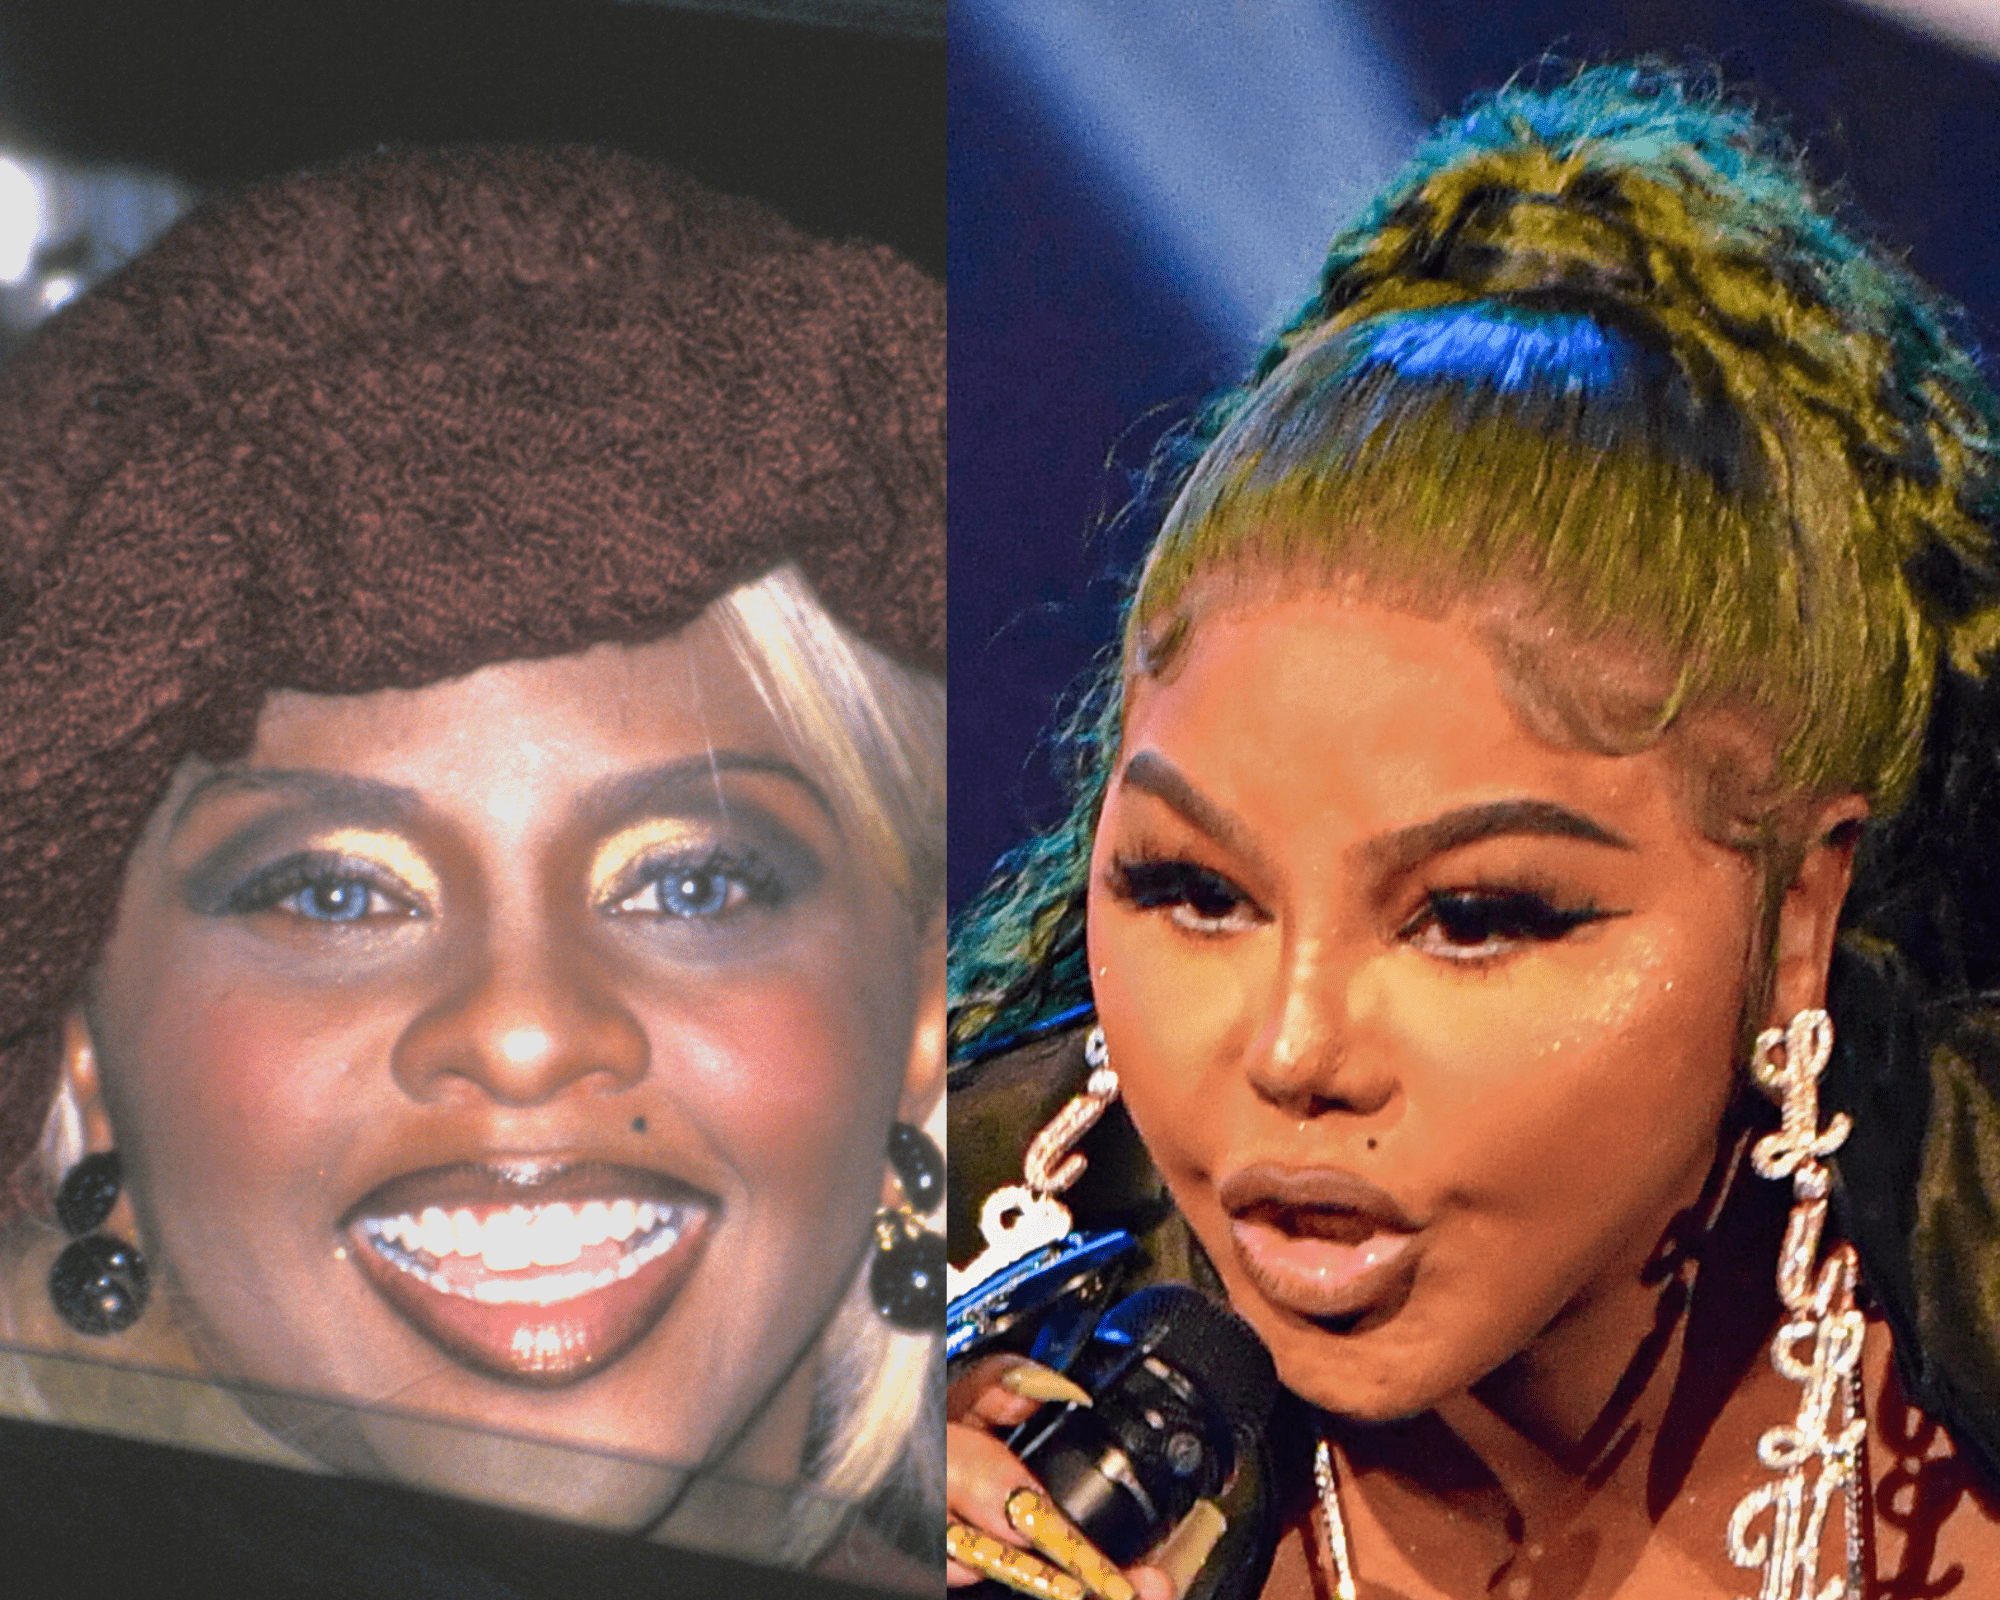 Lil Kim in 1997 at the MTV Video Music Awards | Lil Kim at Cobb Energy Performing Arts Center on September 30, 2022 in Atlanta, Georgia | Getty Images 